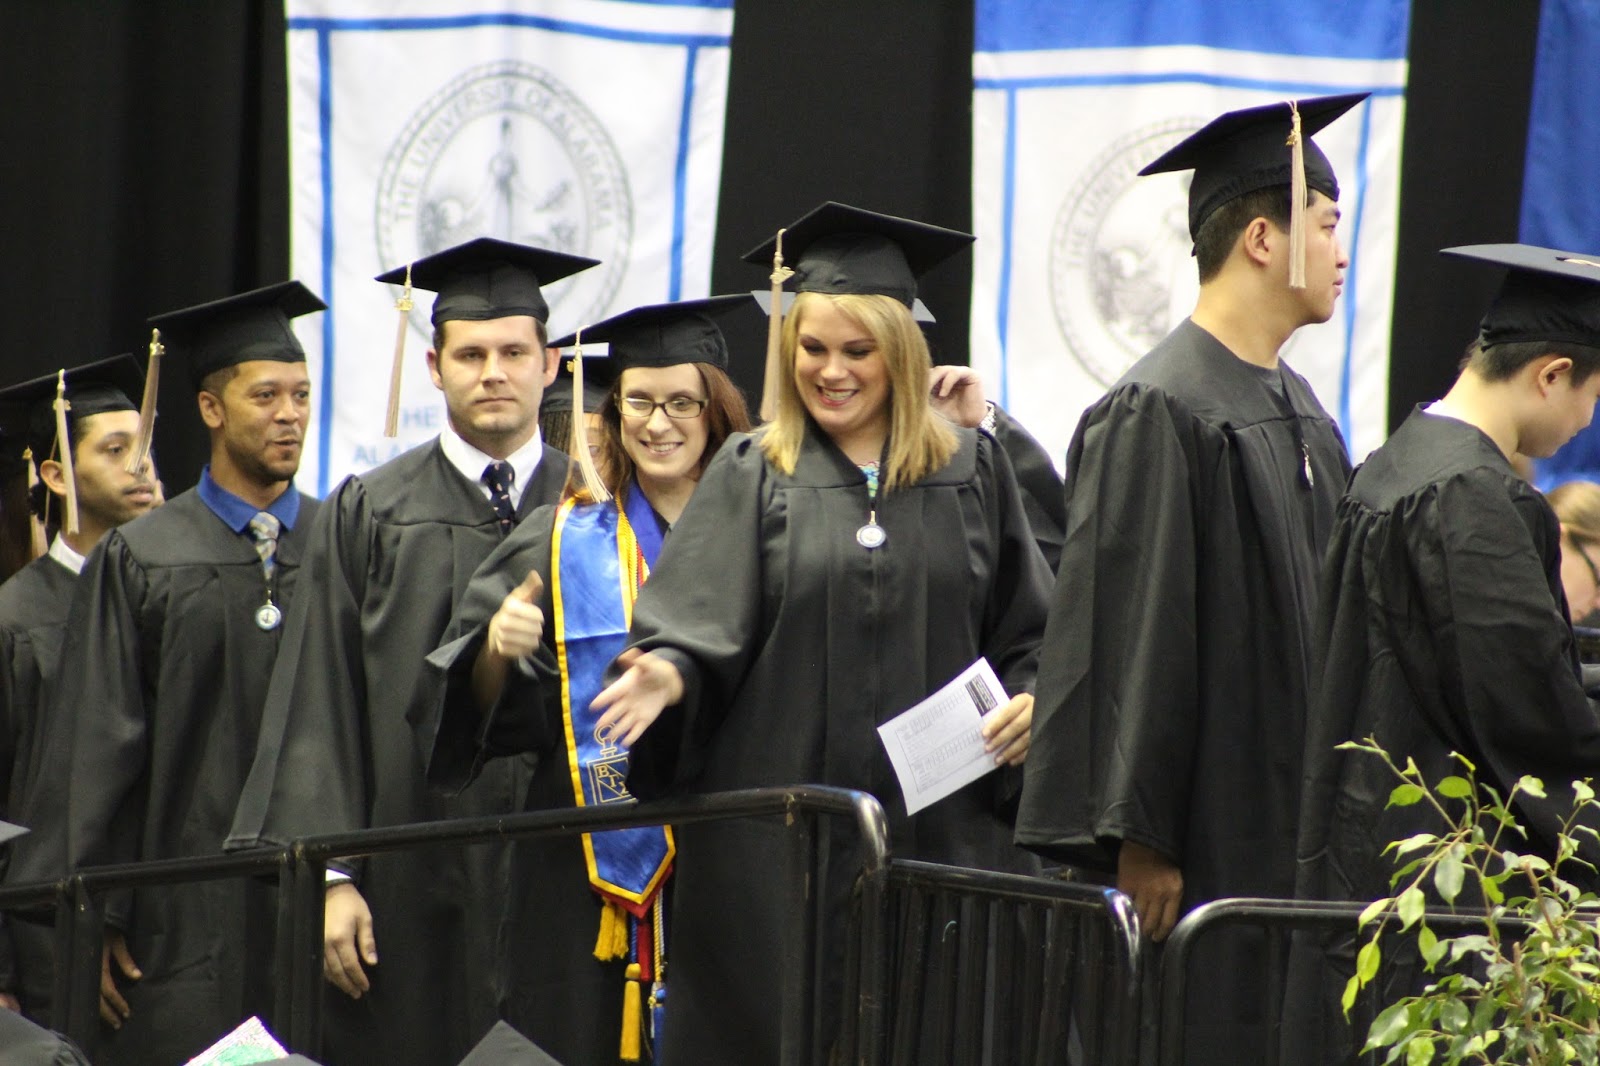 A Future and a Hope UAH Graduation Part 5 "The Big Day!"